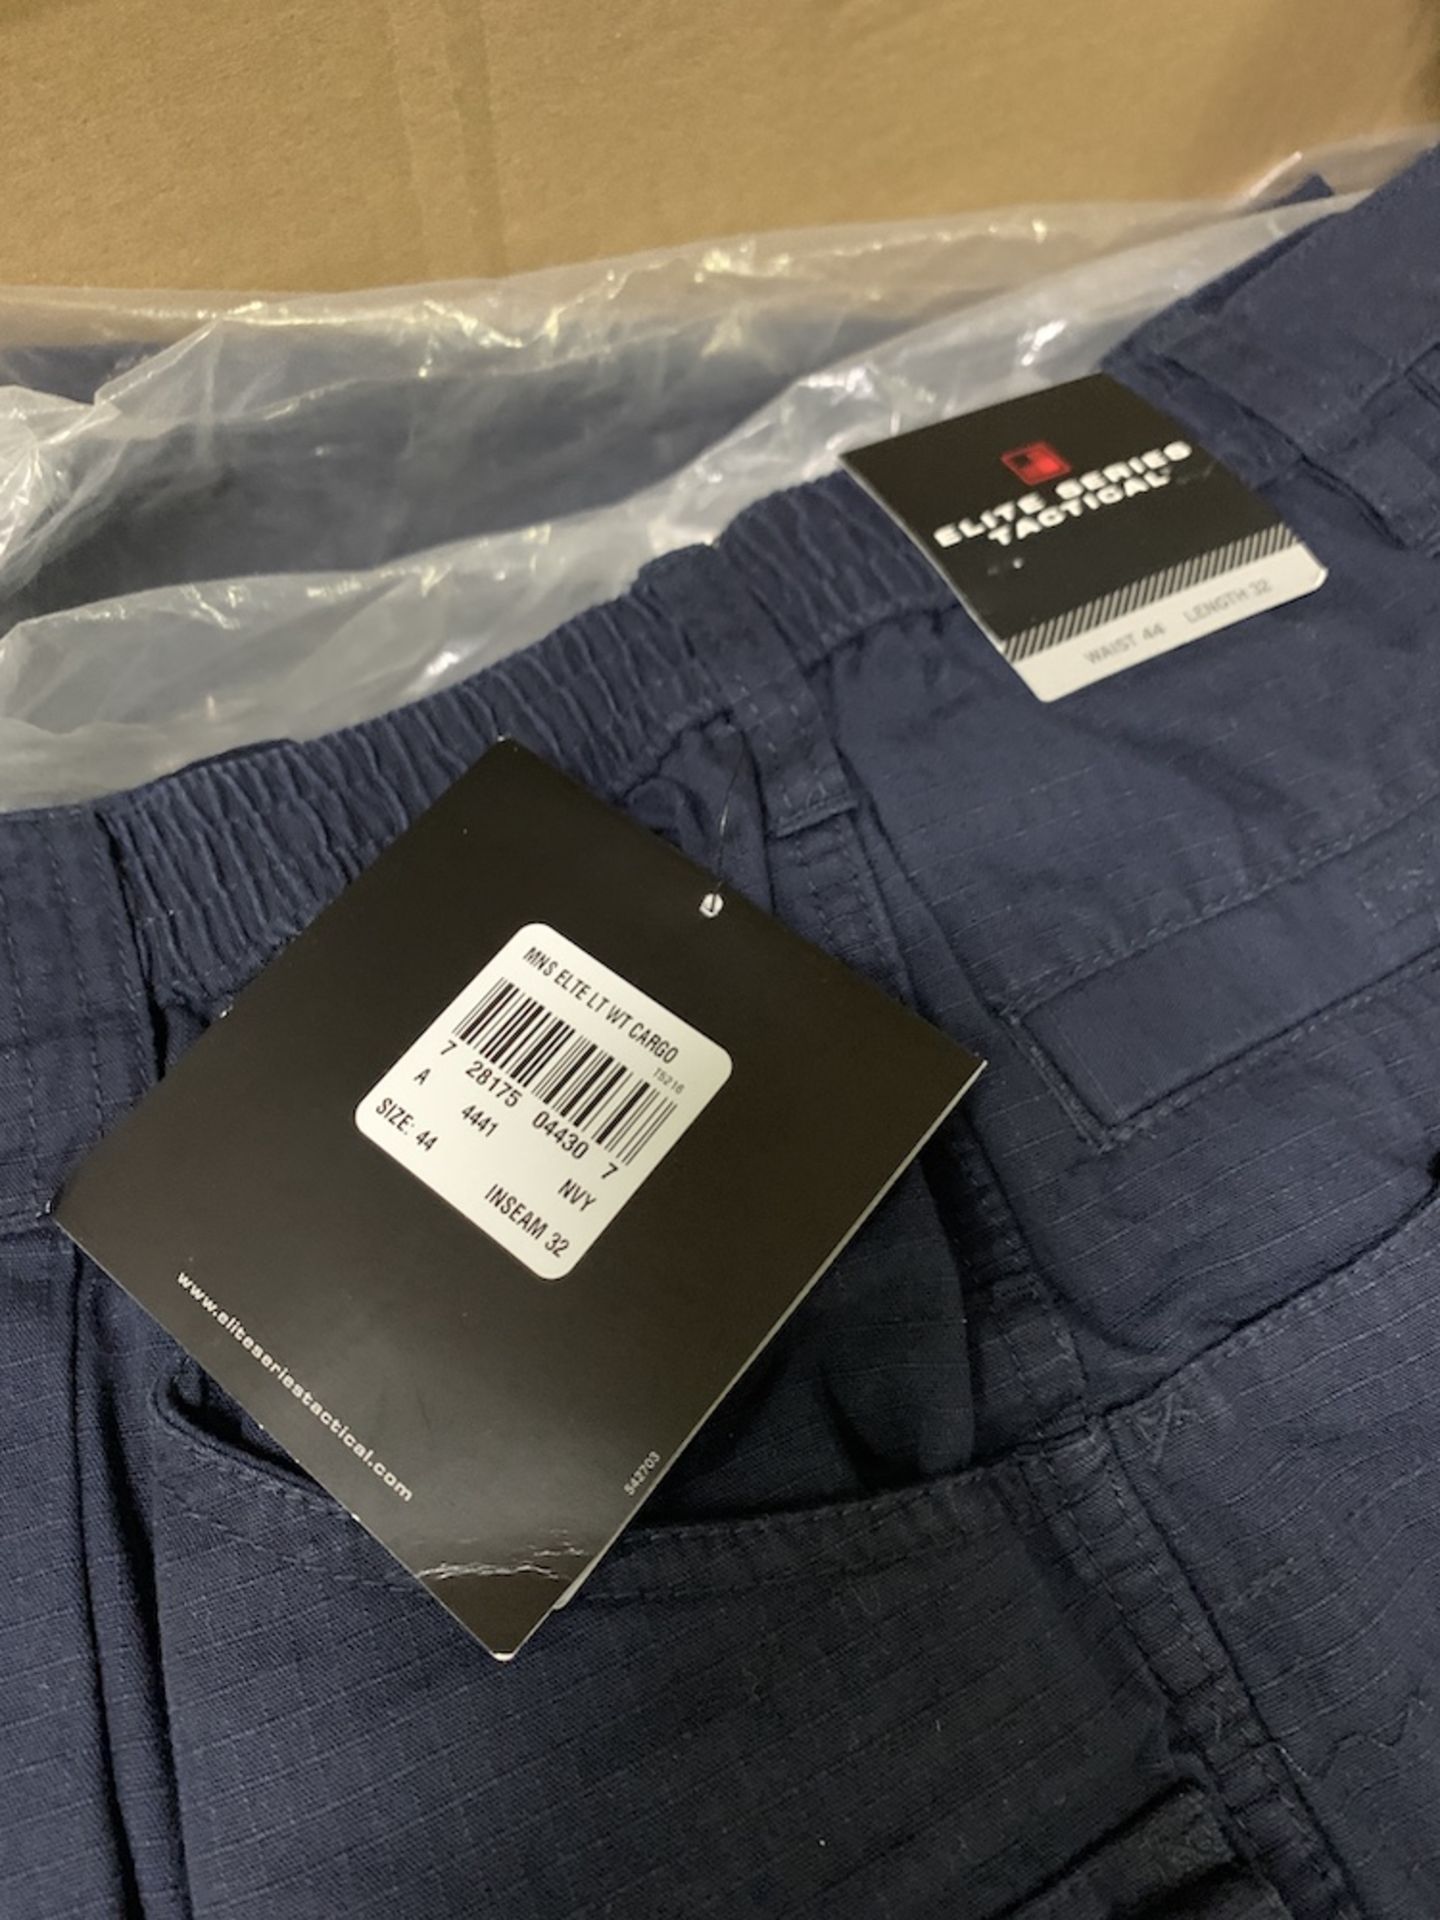 51 Pairs of Woolrich Elite Series Tactical Pants, Teflon, Navy, New, Various Sizes, Retail $1,275+ - Image 3 of 5